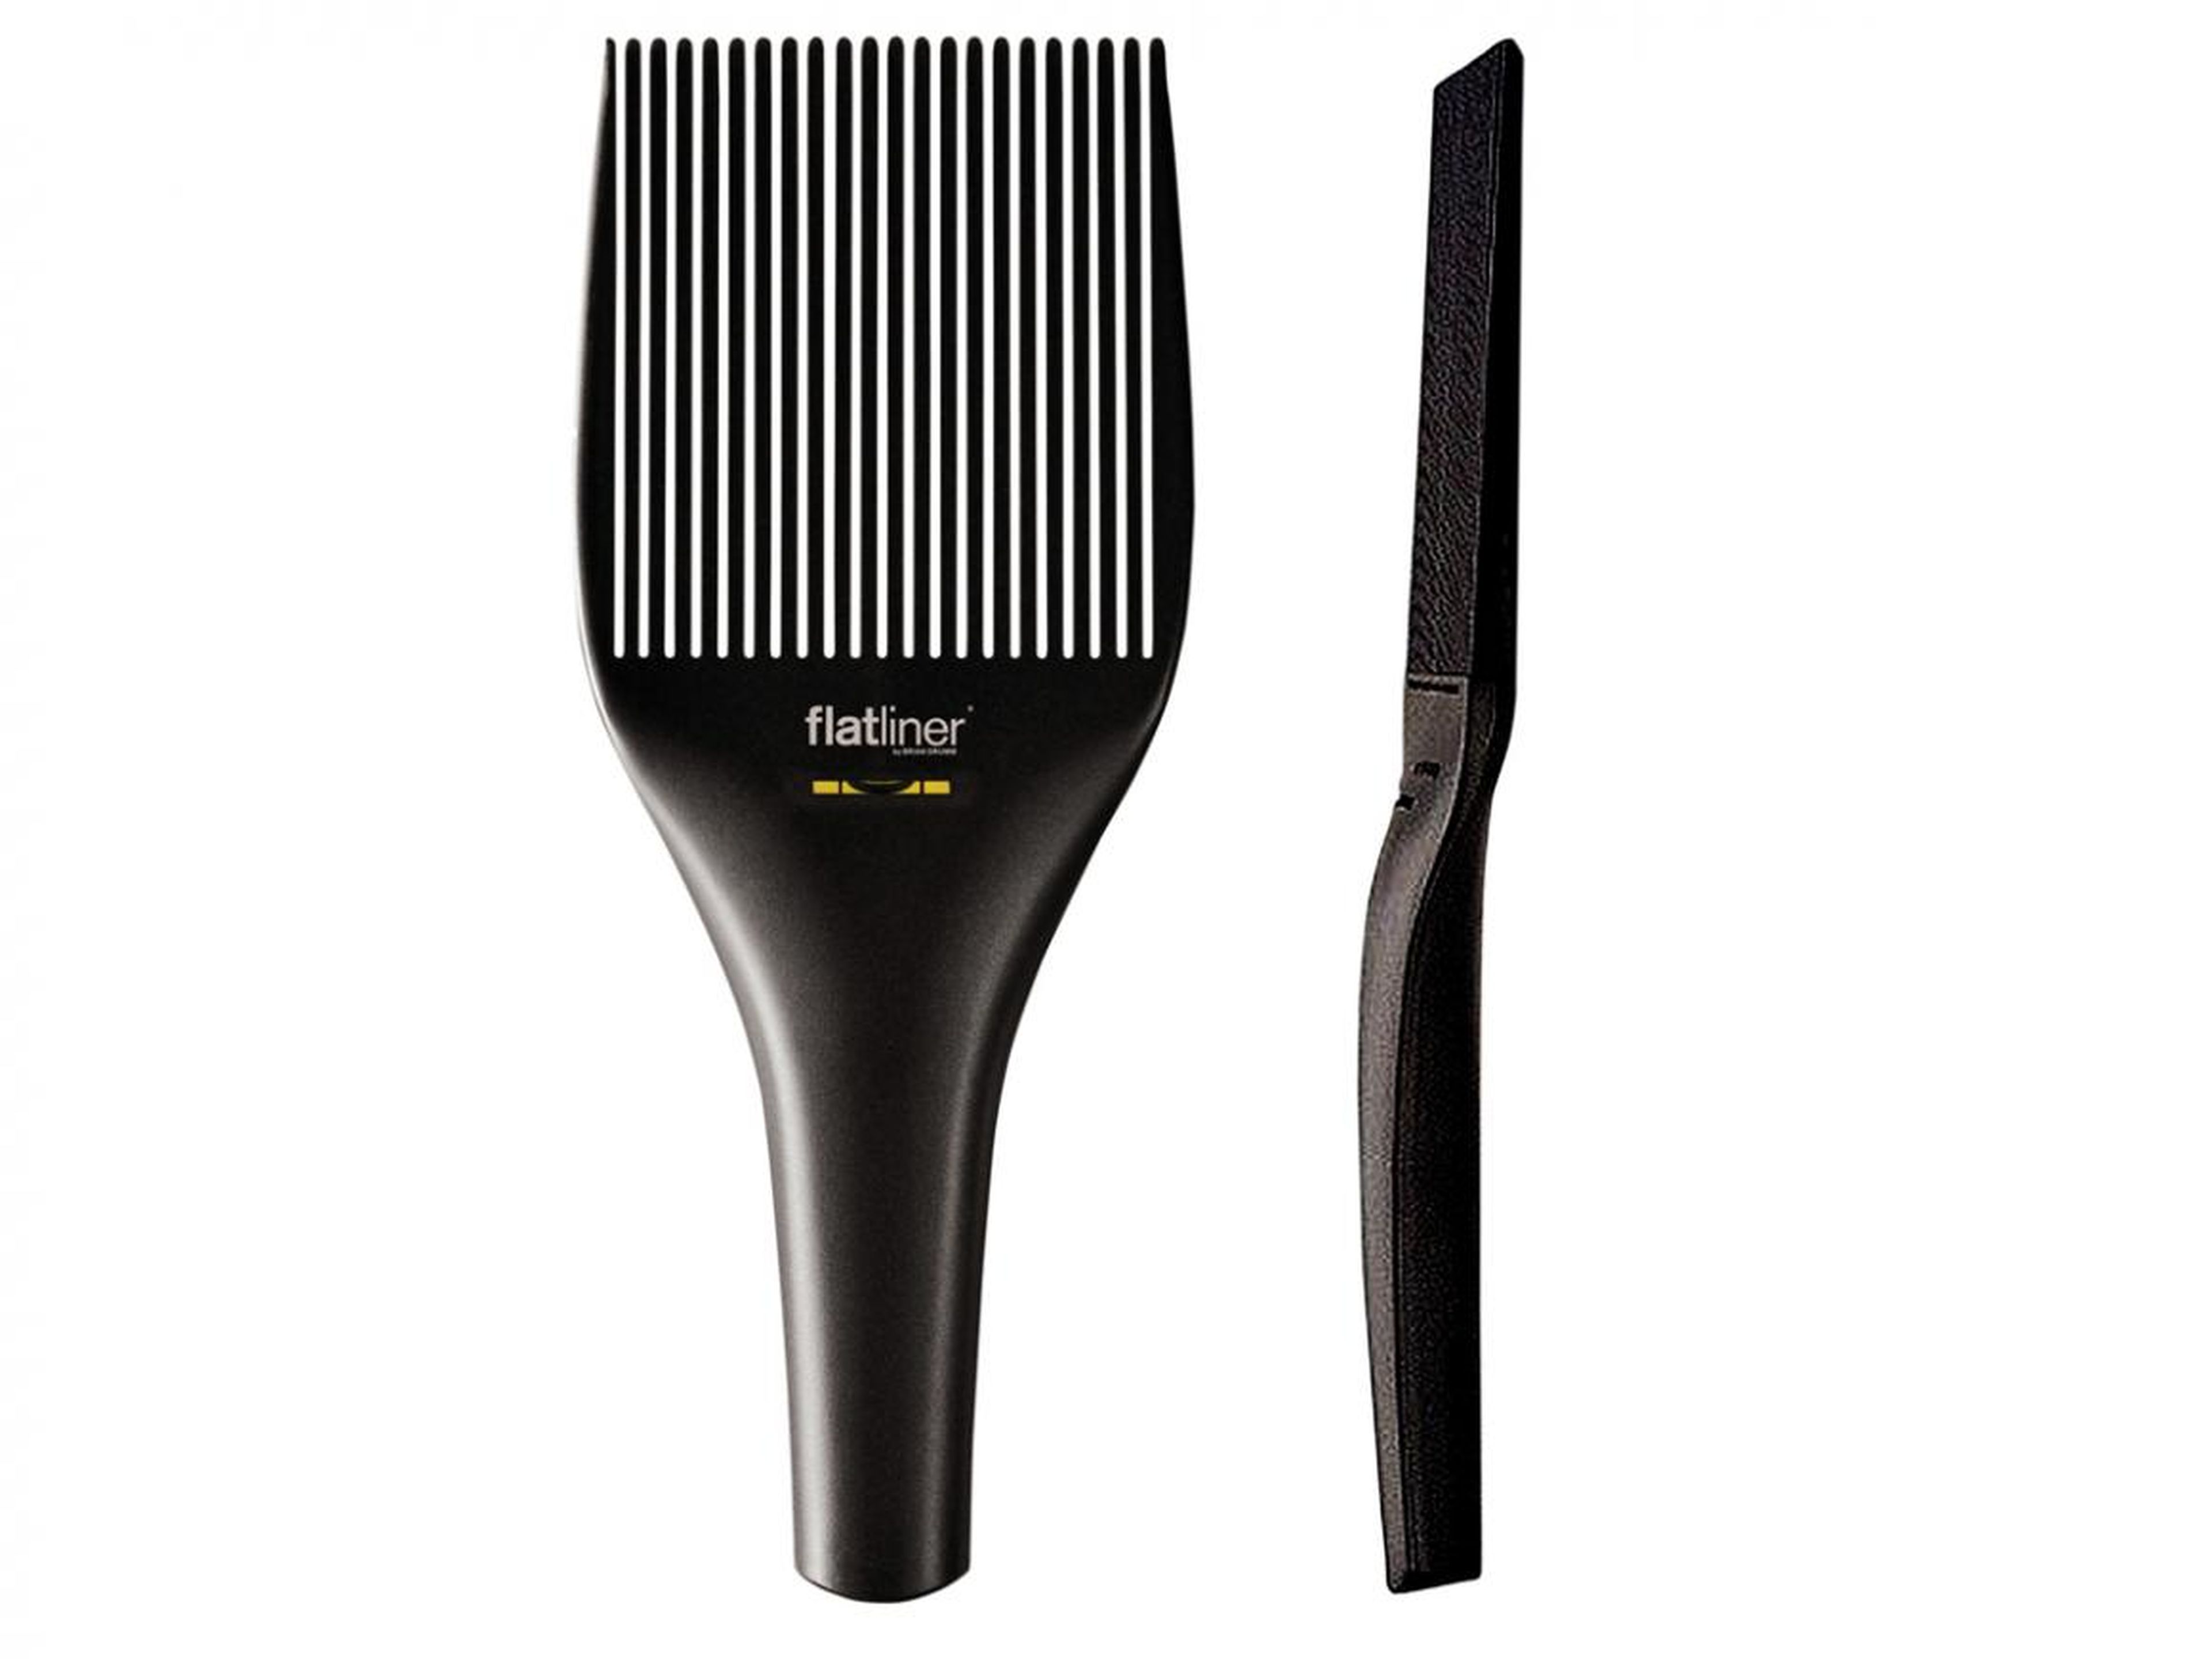 And this large comb, called The Brian Drumm Flatliner comb.